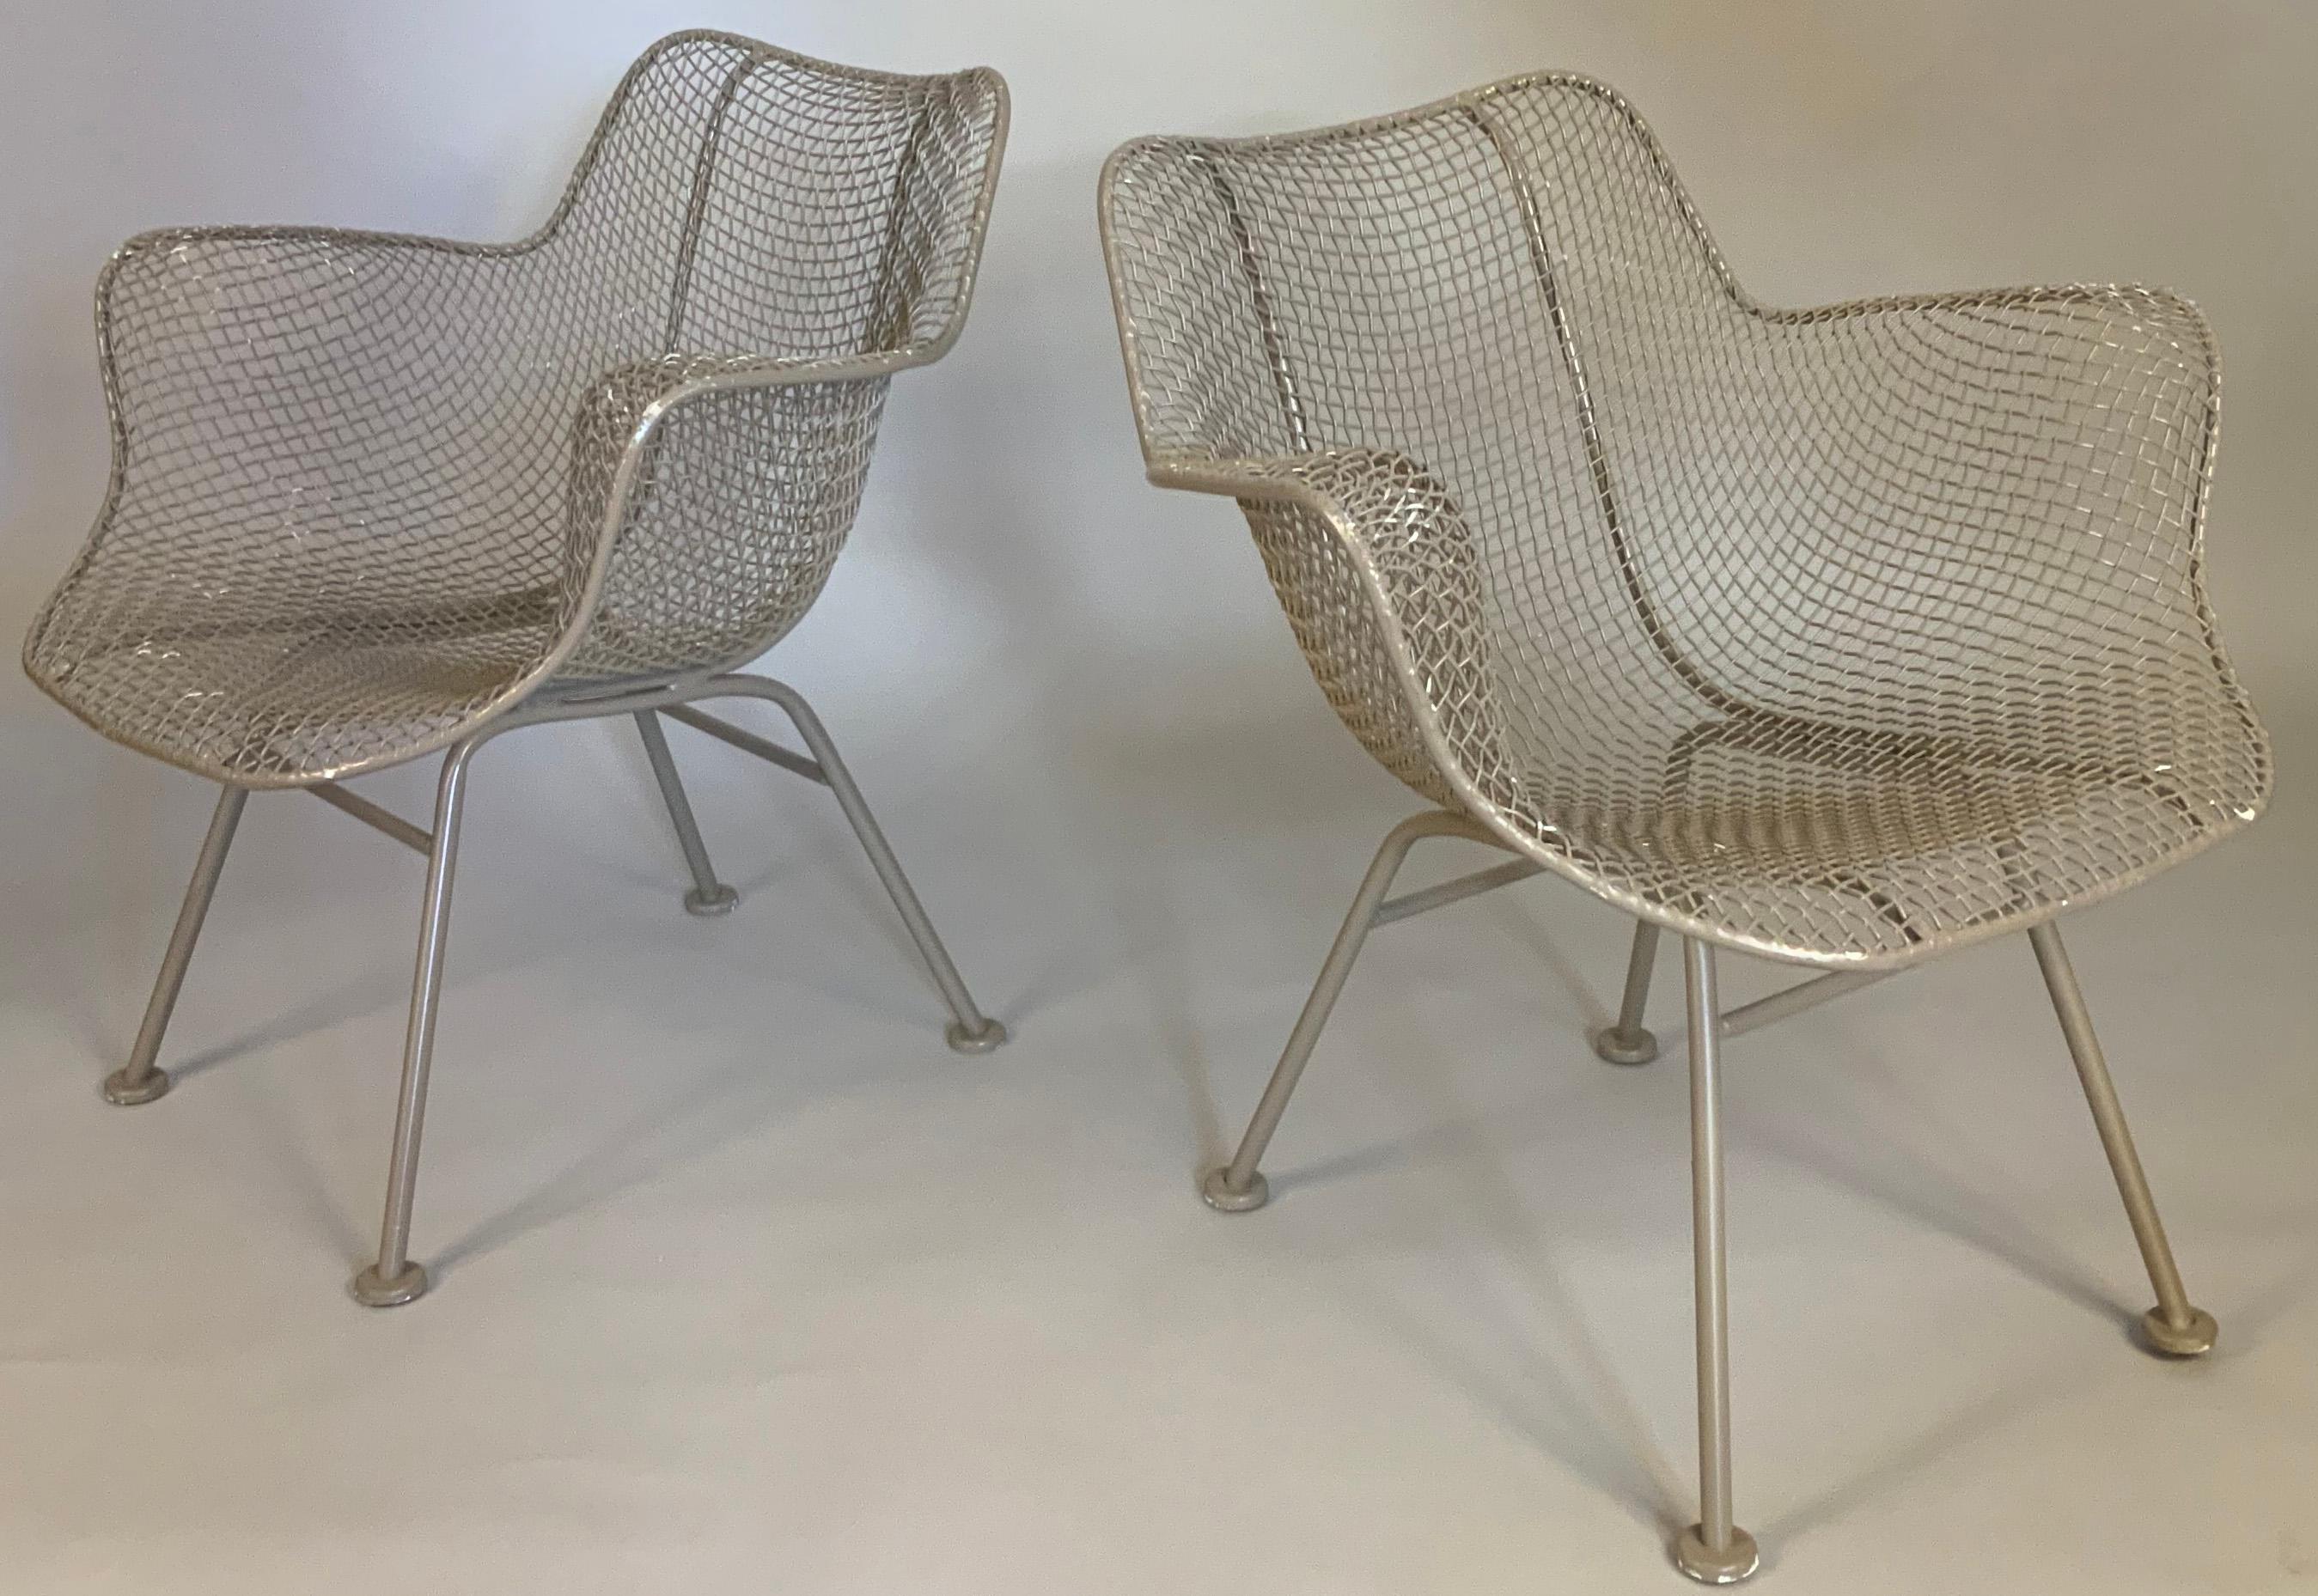 A matched set of four vintage 1950's Sculptura armchairs designed by Russell Woodard. these iconic chairs have woven steel mesh over curved wrought iron frames. they are in a beige finish, which has some losses. can be stripped and refinished in any